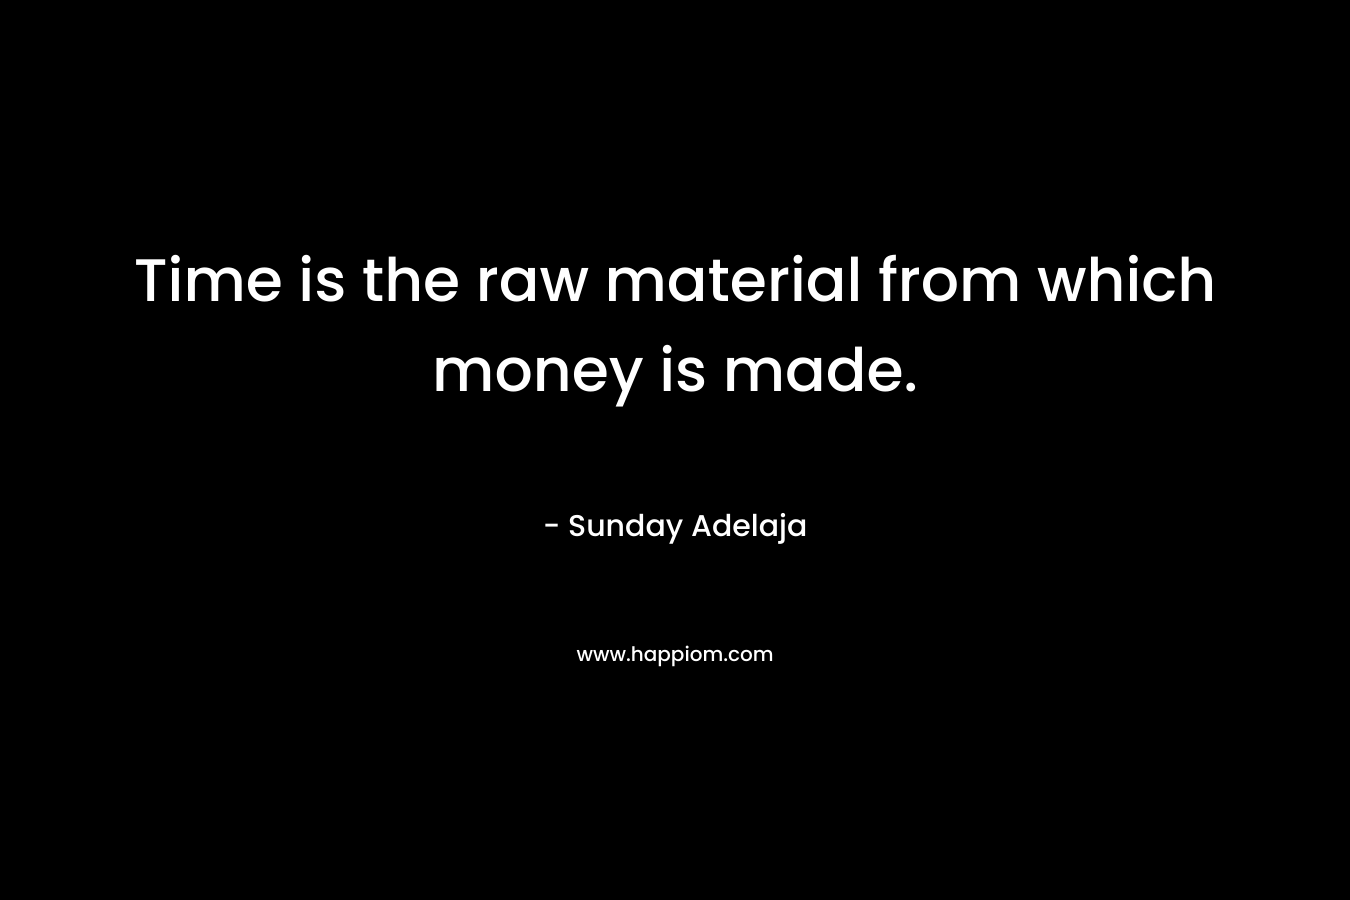 Time is the raw material from which money is made.